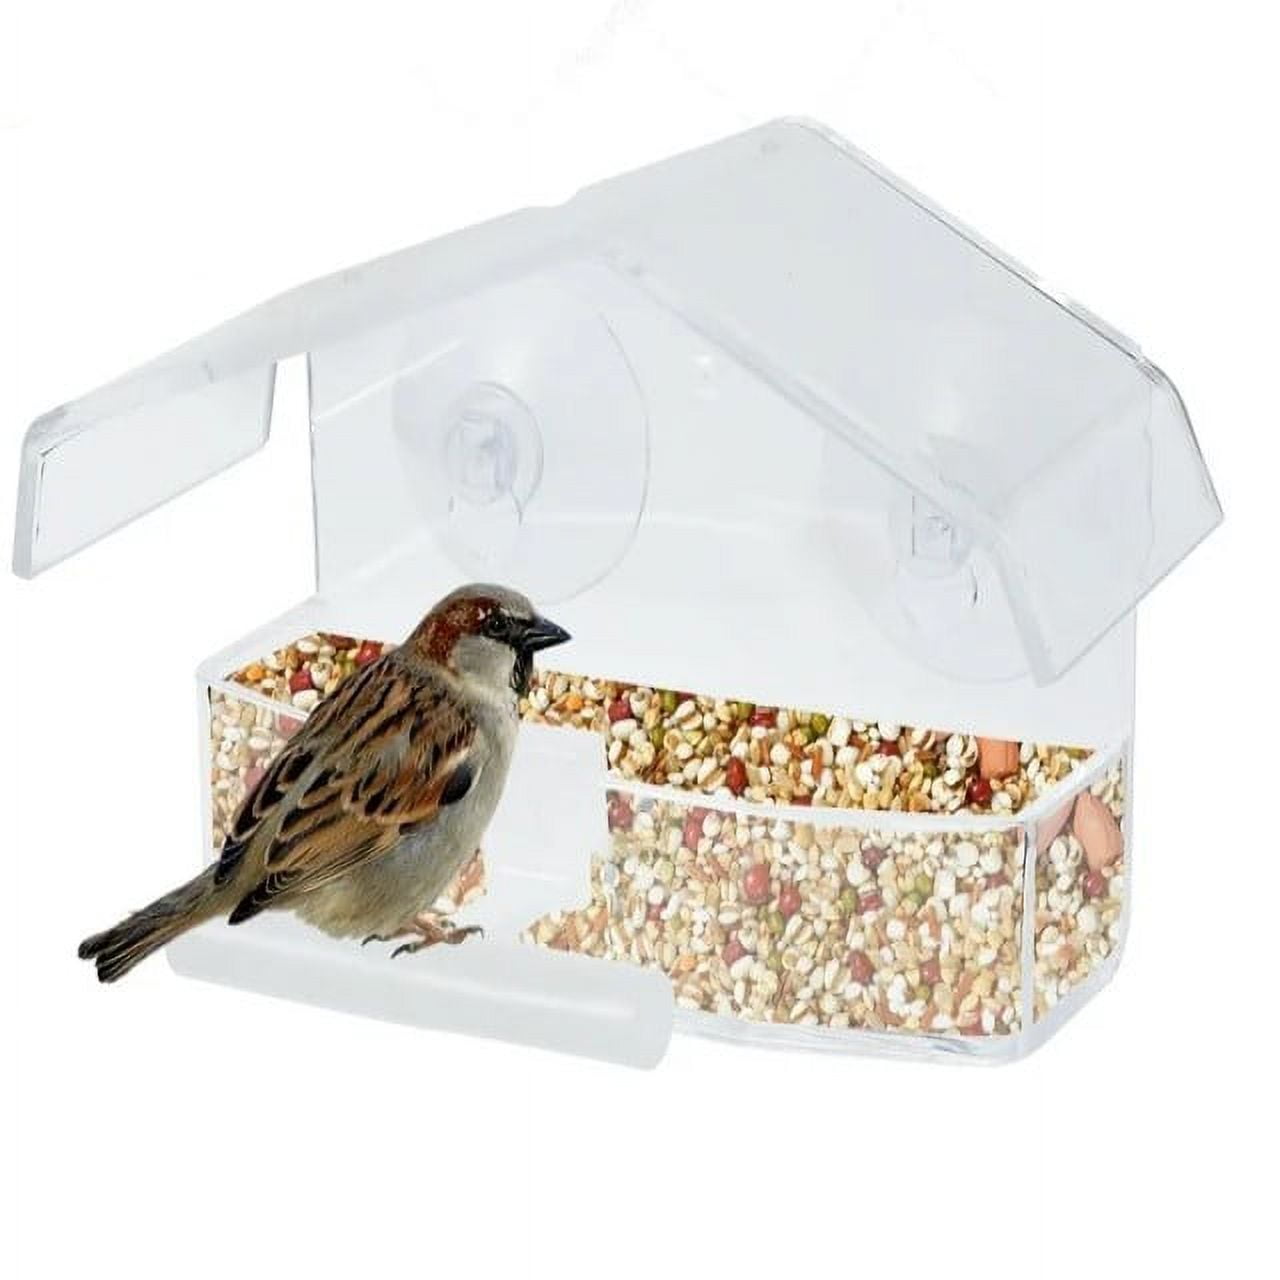 Tcwhniev Bird Feeder Wild Bird Seed Feeder Removable Window Suction Cups Hanging Clear Viewing Feed Tray - image 1 of 9